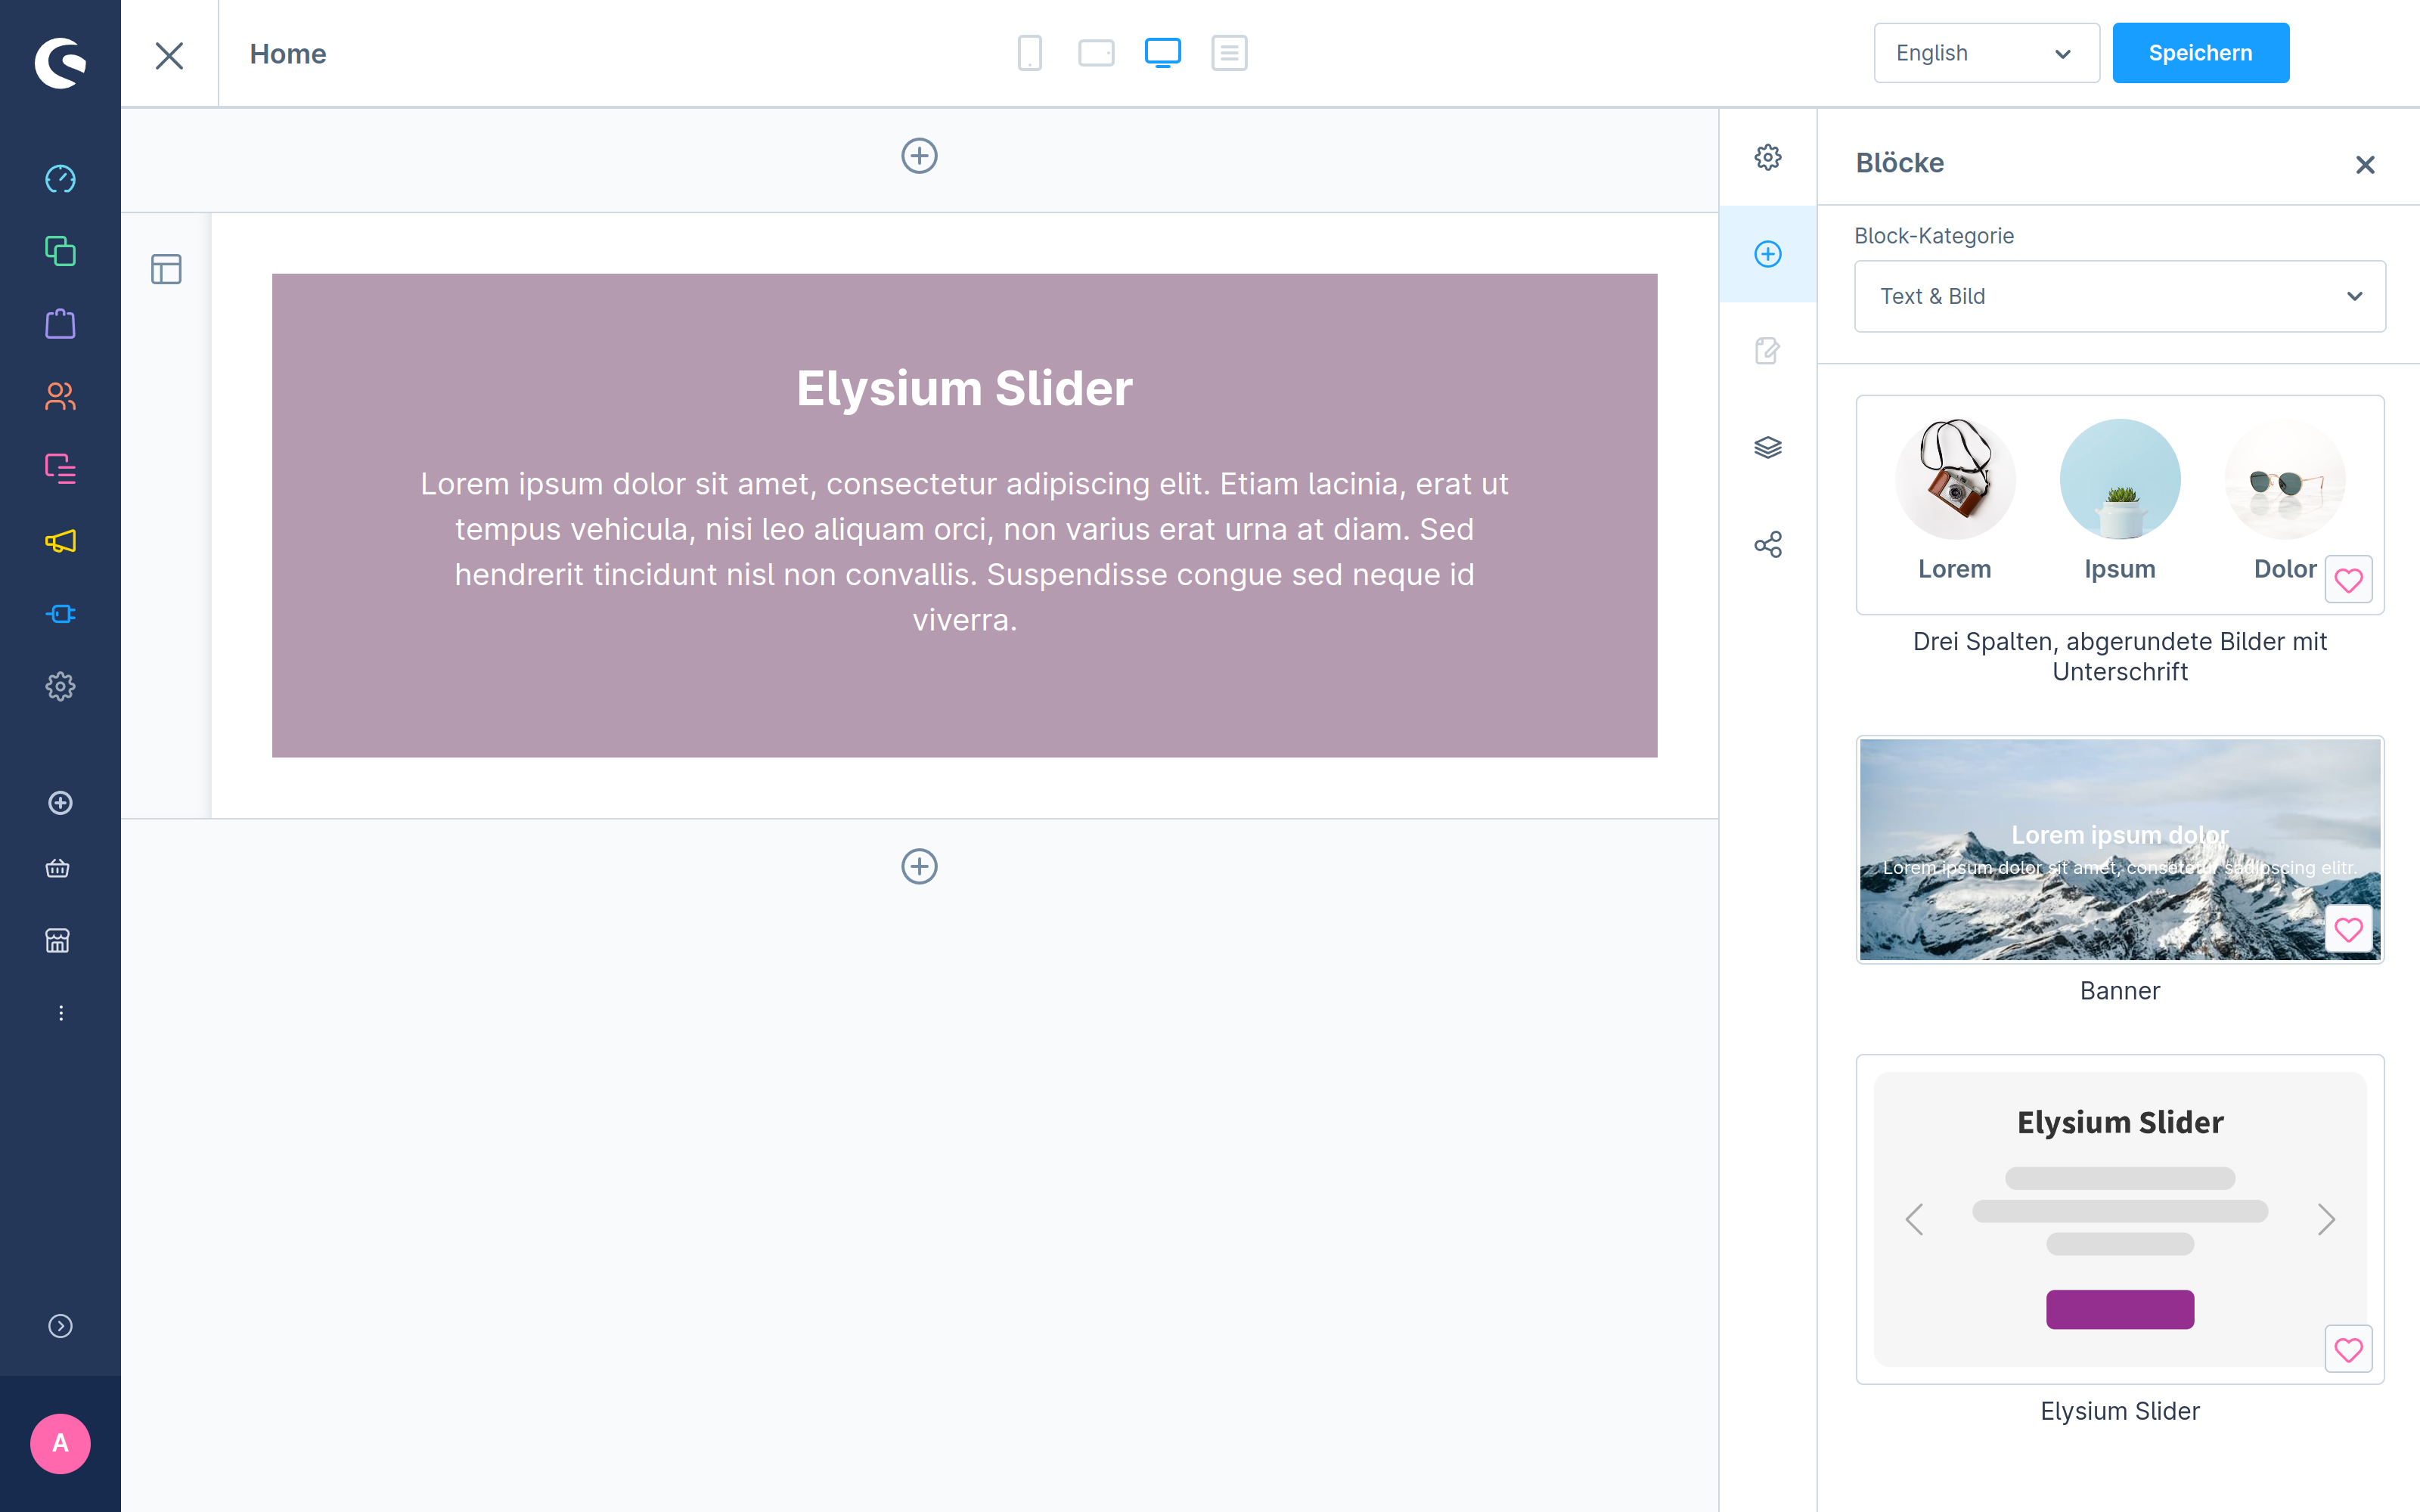 Elysium Slider in Block group Text and Images whitin Shopping expierence layout